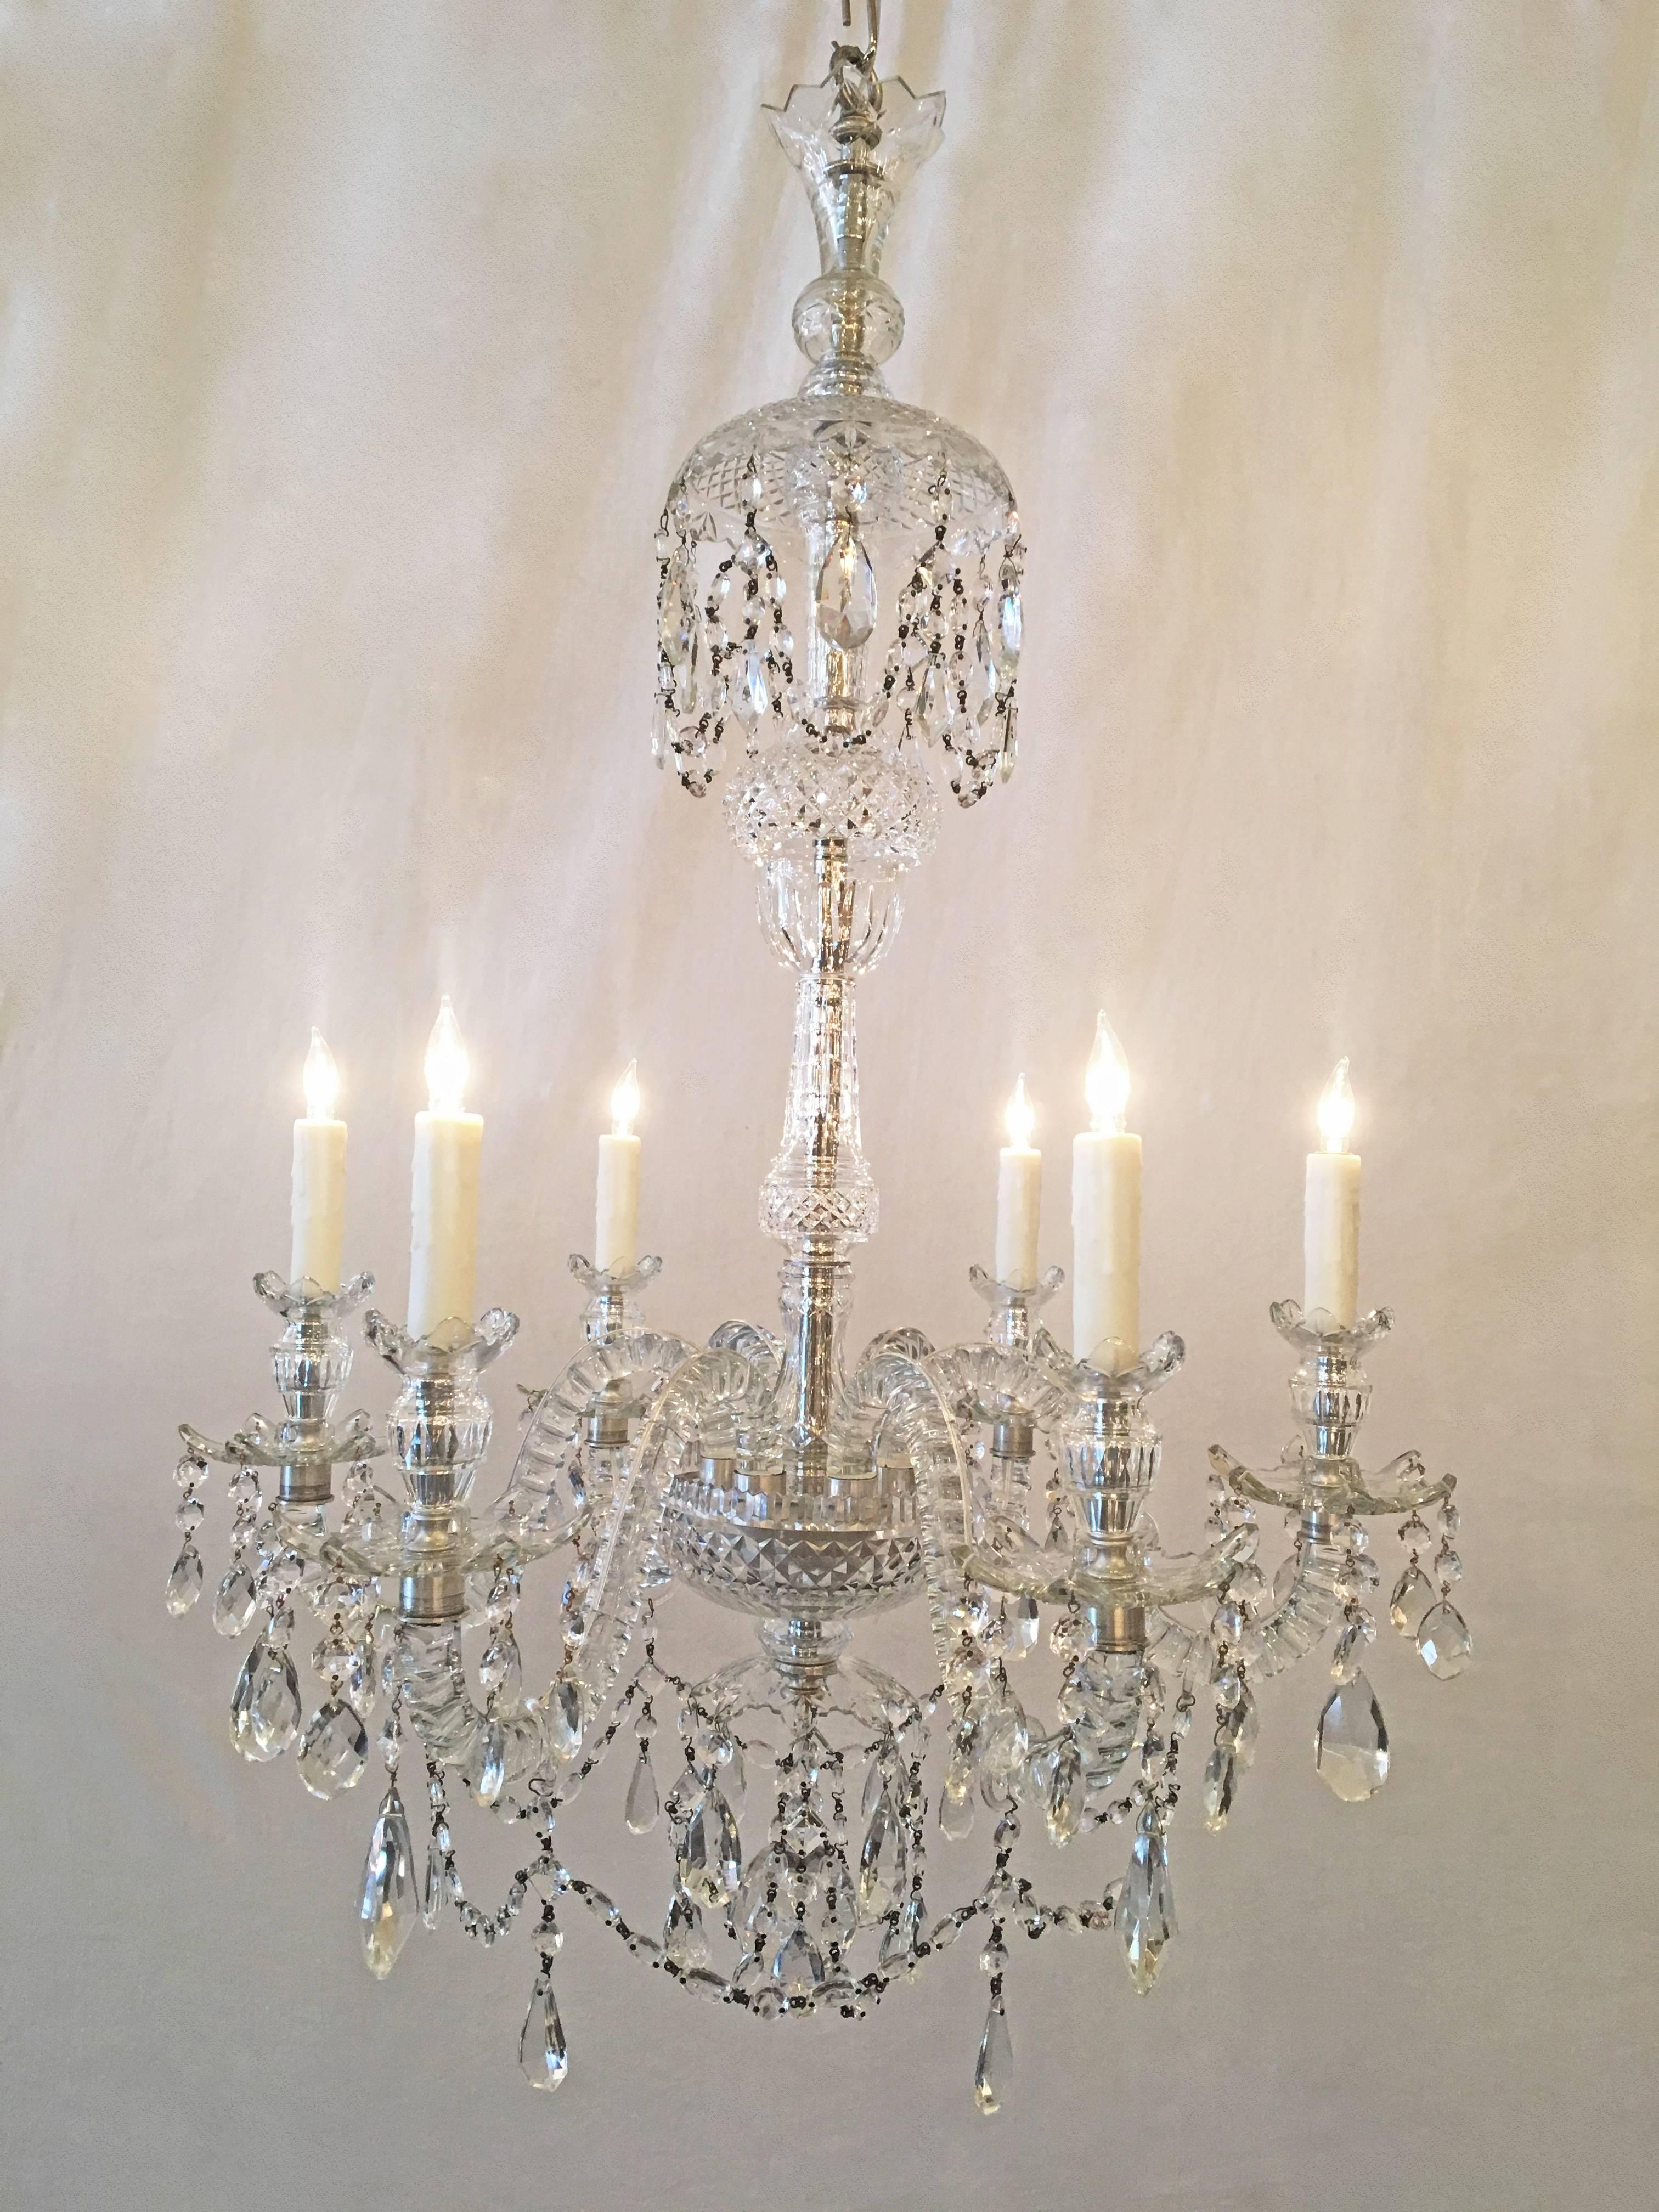 This 19th century Georgian Anglo Irish crystal chandelier that was originally candle is now French wired. The six S-scrolled arms are solid crystal with hand-cut thumbnail reeding. Contains beautiful crystal bobeches. Chandelier is silver plate